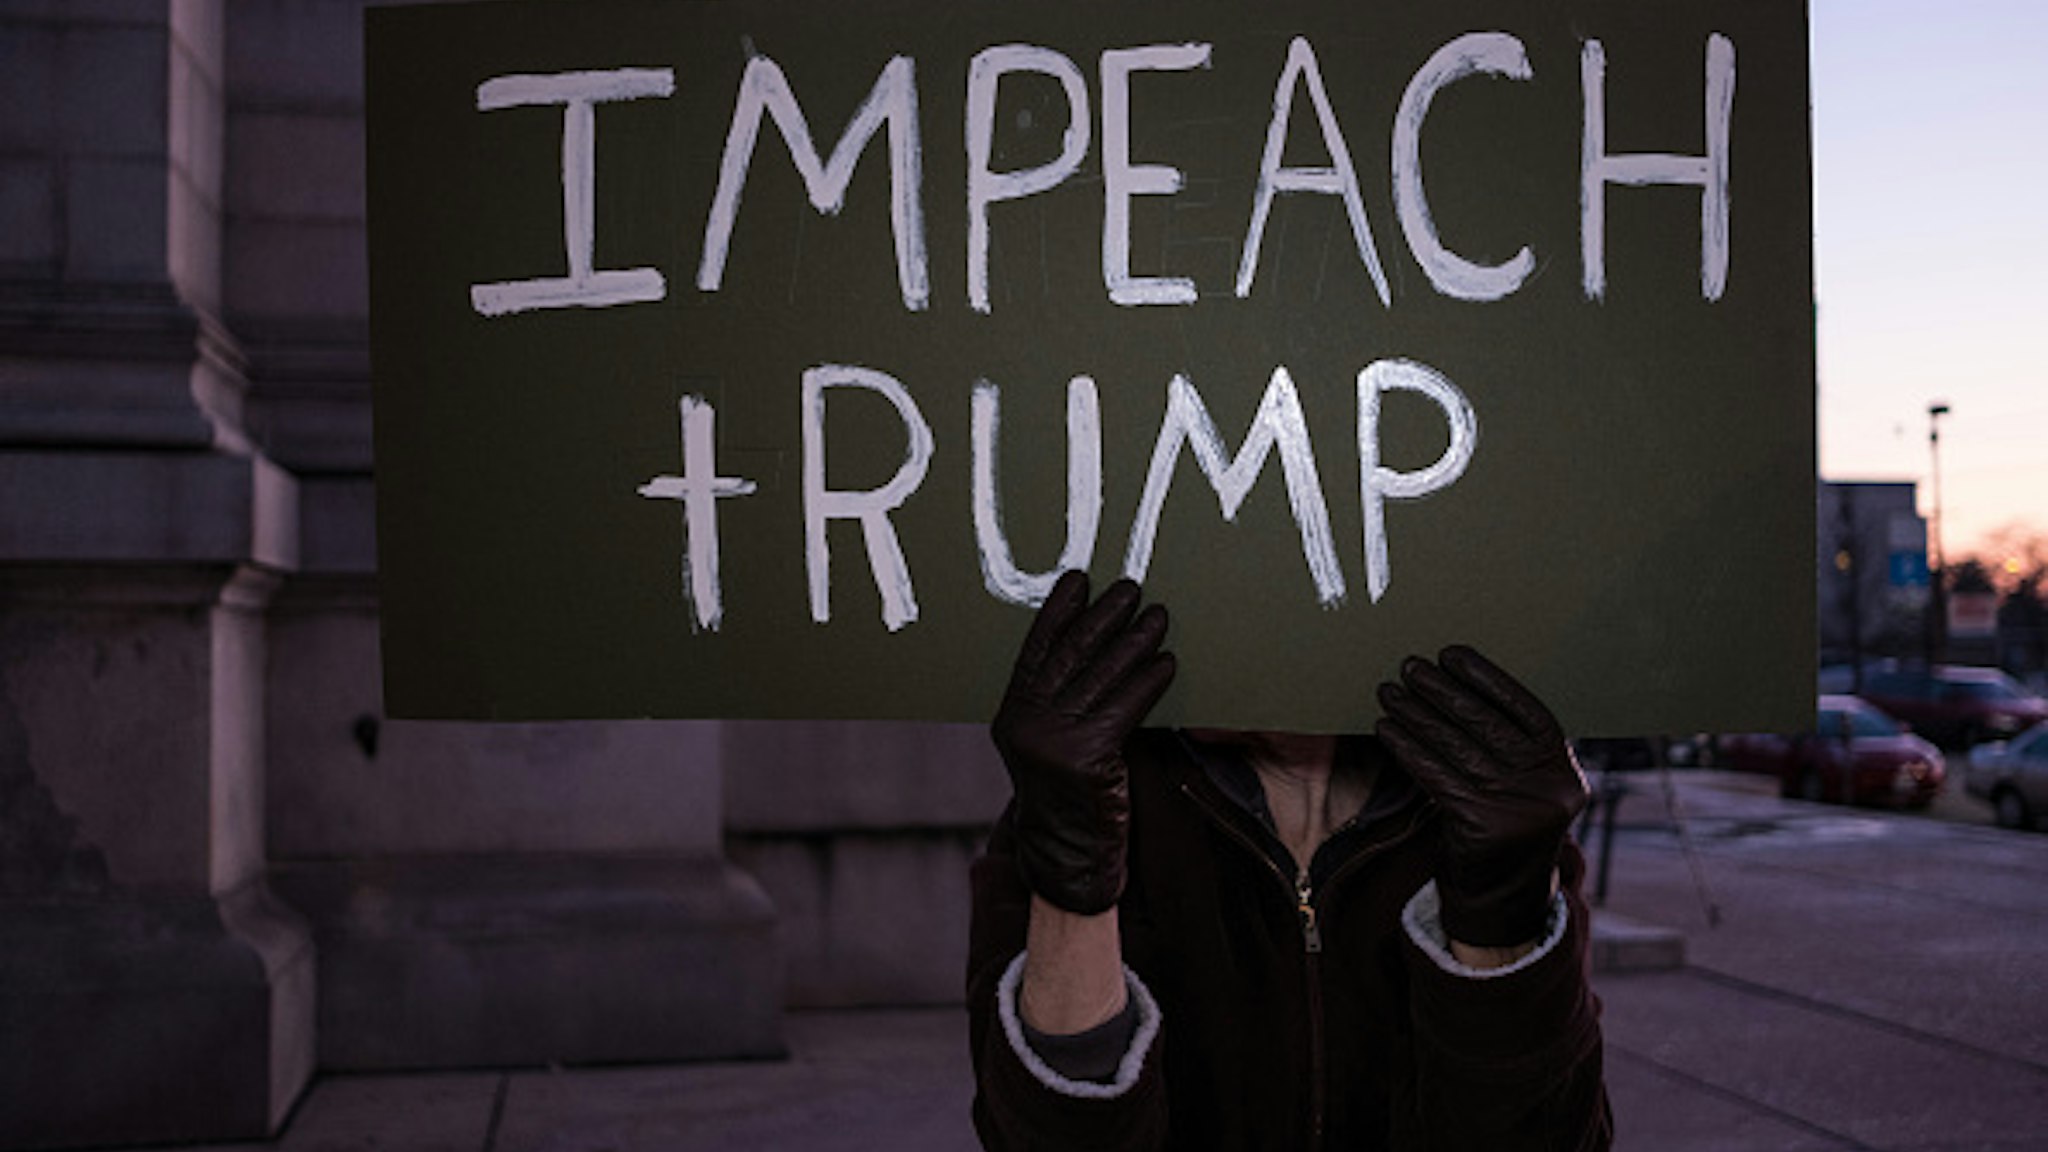 DAYTON, OHIO, UNITED STATES - 2019/12/17: A protester holds an Impeach Trump placard during a Trump pro-impeachment rally in Dayton. The protesters gathered in Dayton to show their support for Trumps impeachment the day before the House vote.